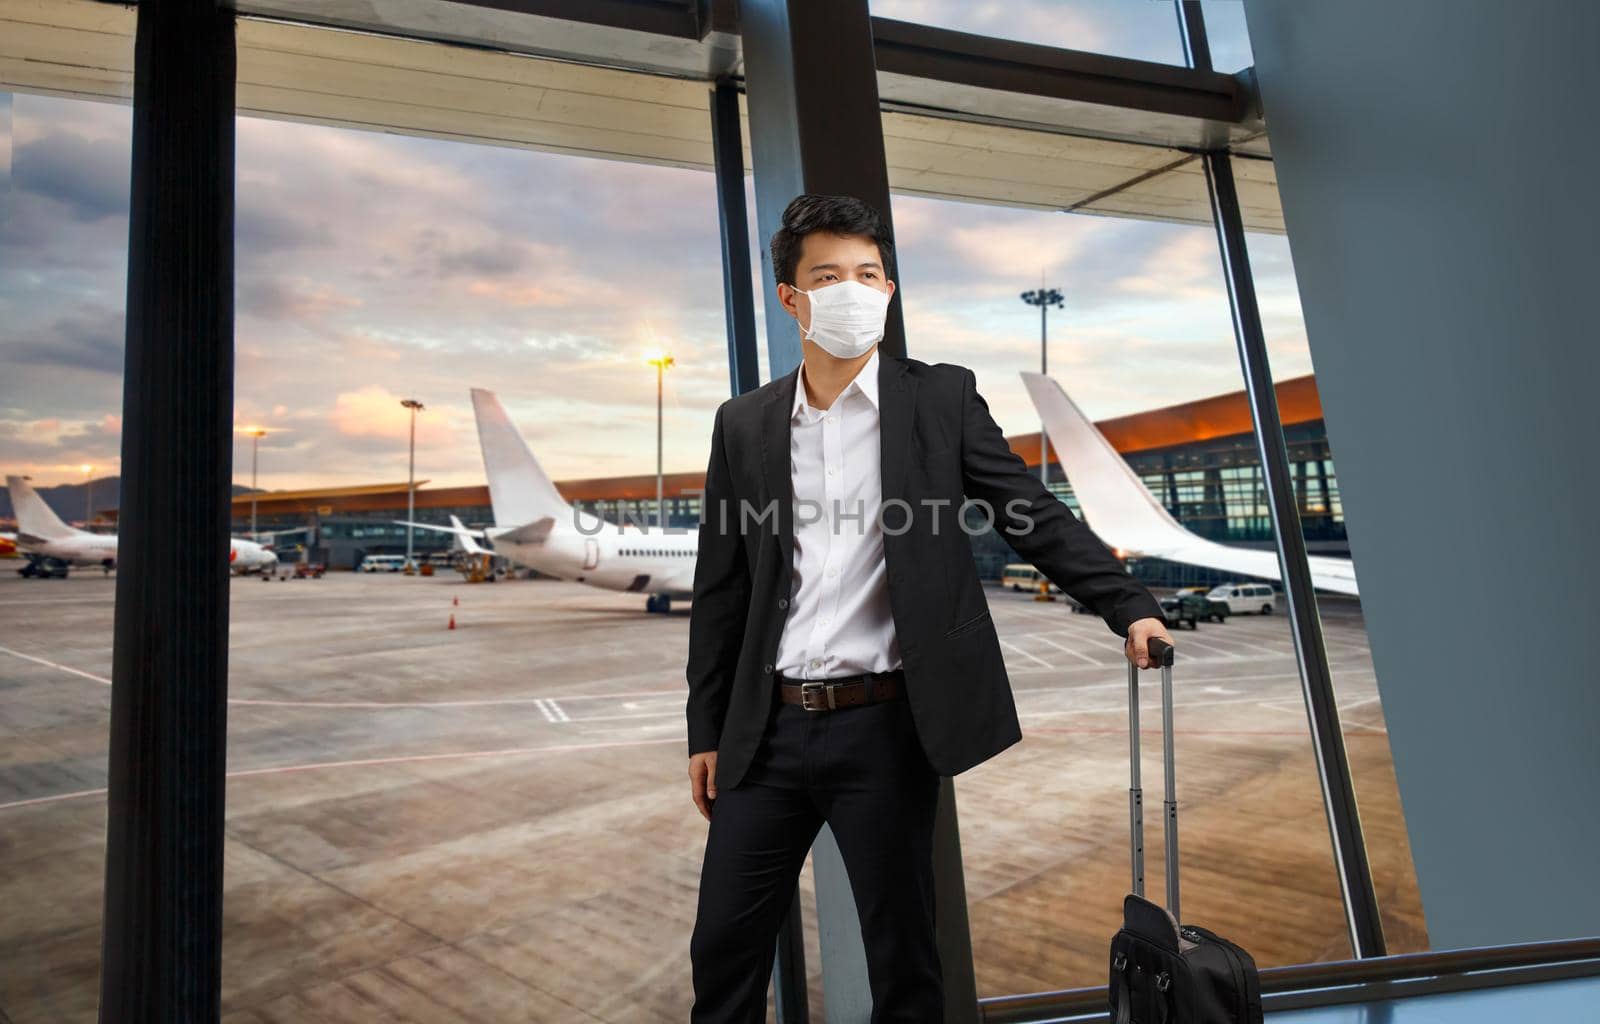 New normal lifestyle ,Air travellers must wear masks to protect covid-19 by toa55